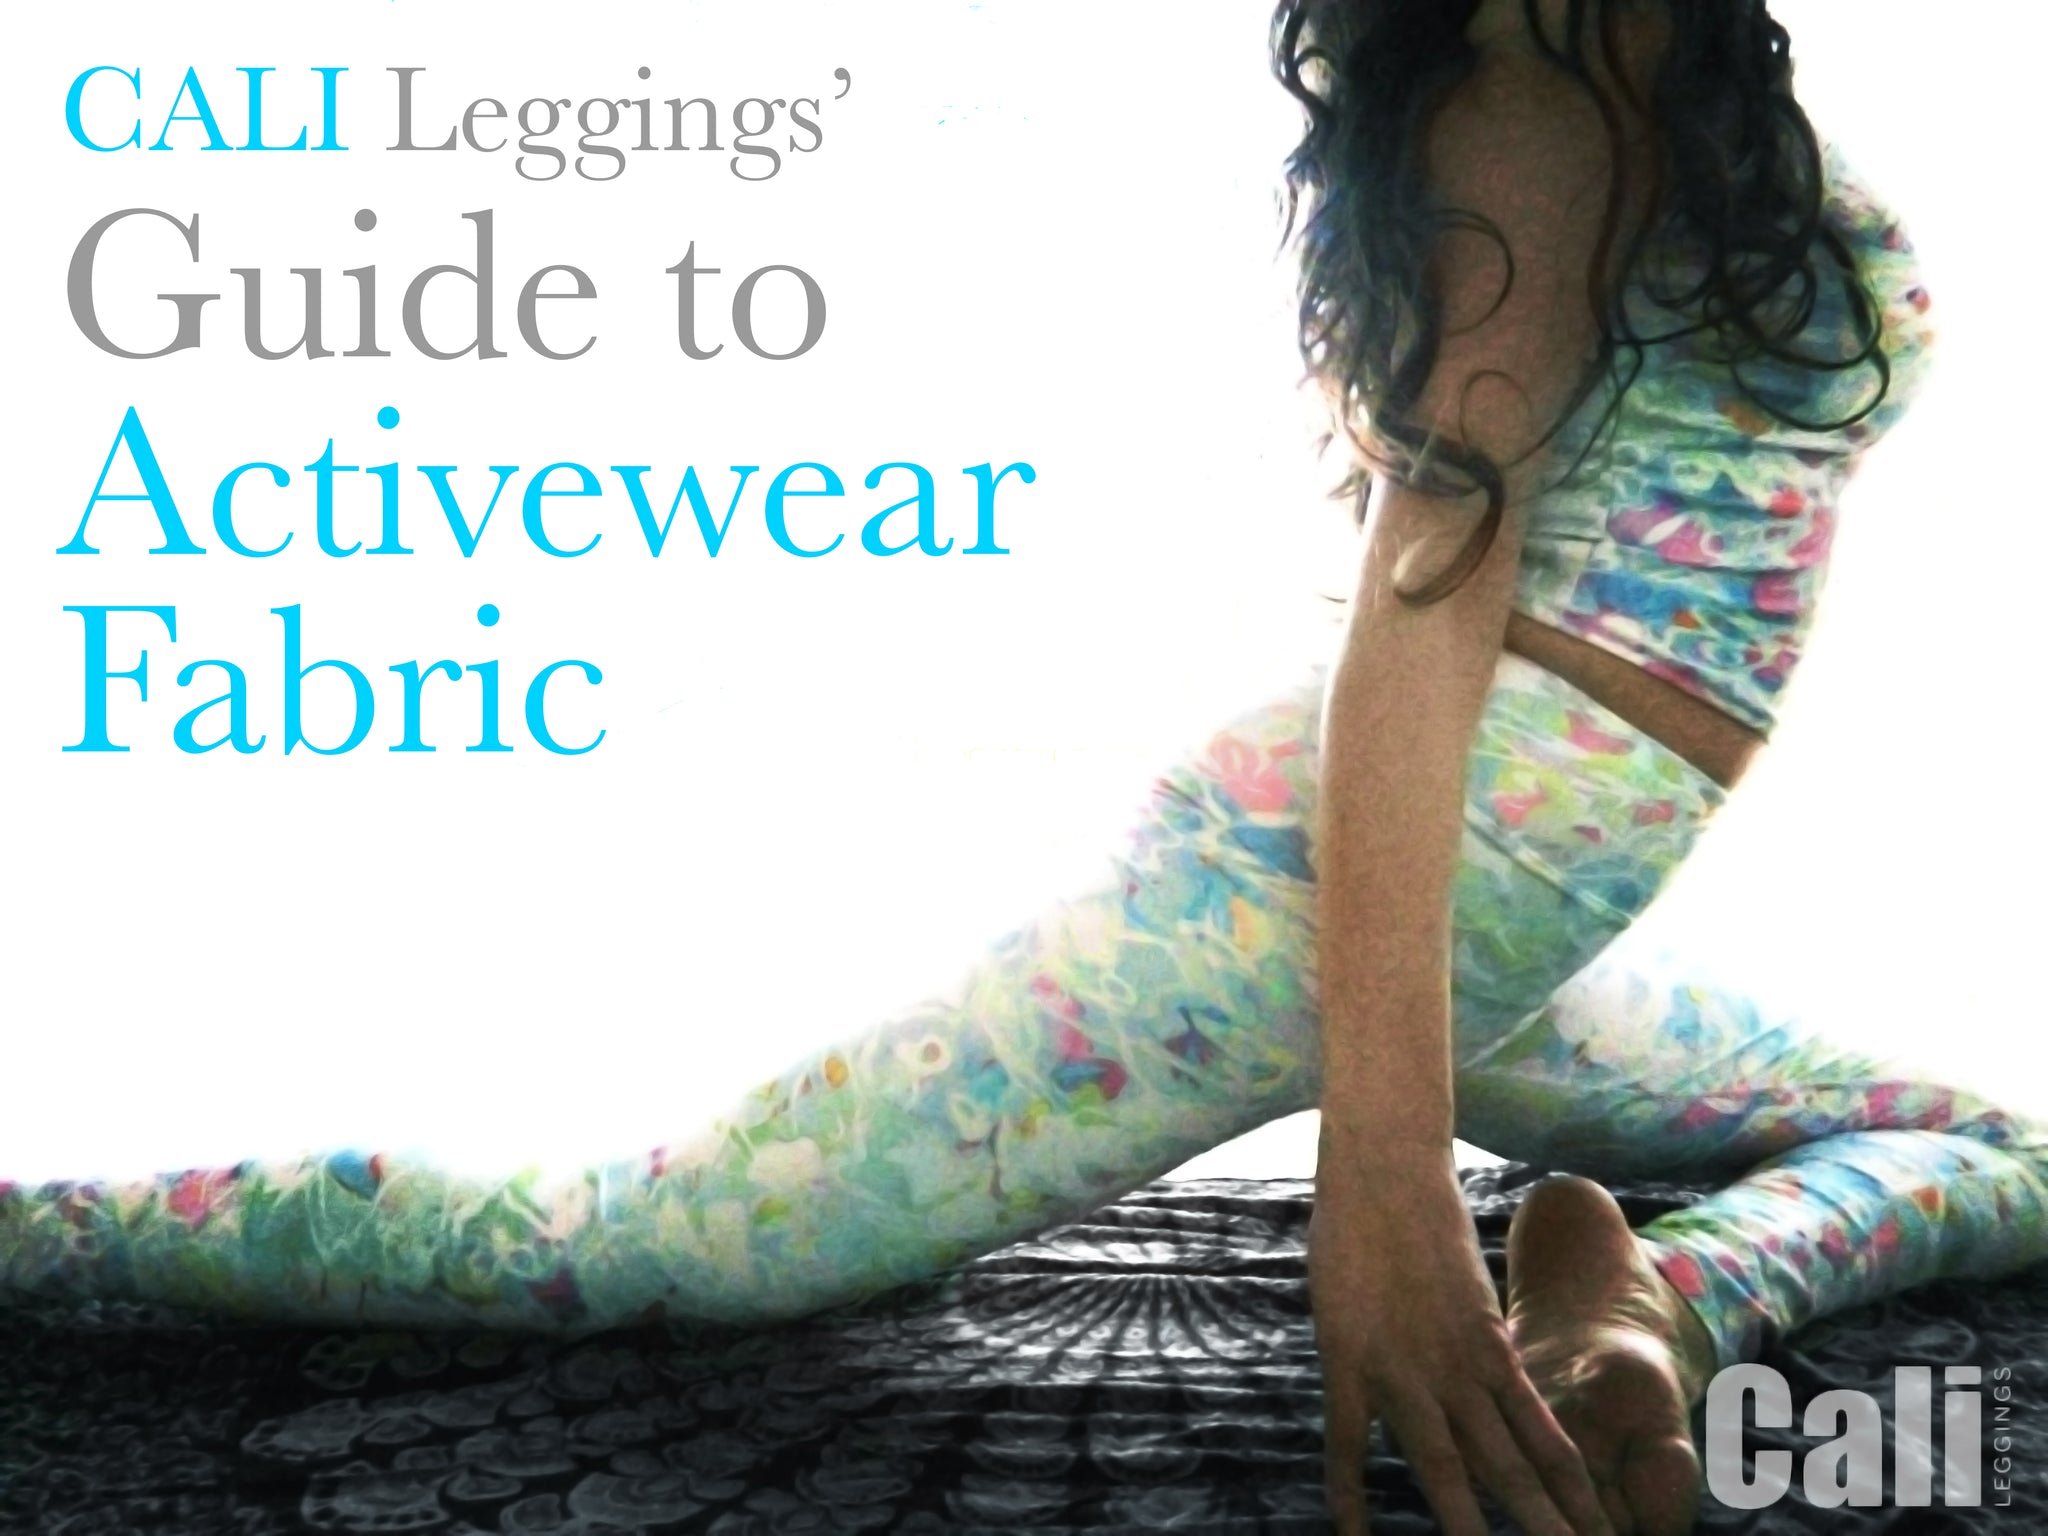 The CALI Leggings' Guide to Activewear Fabric